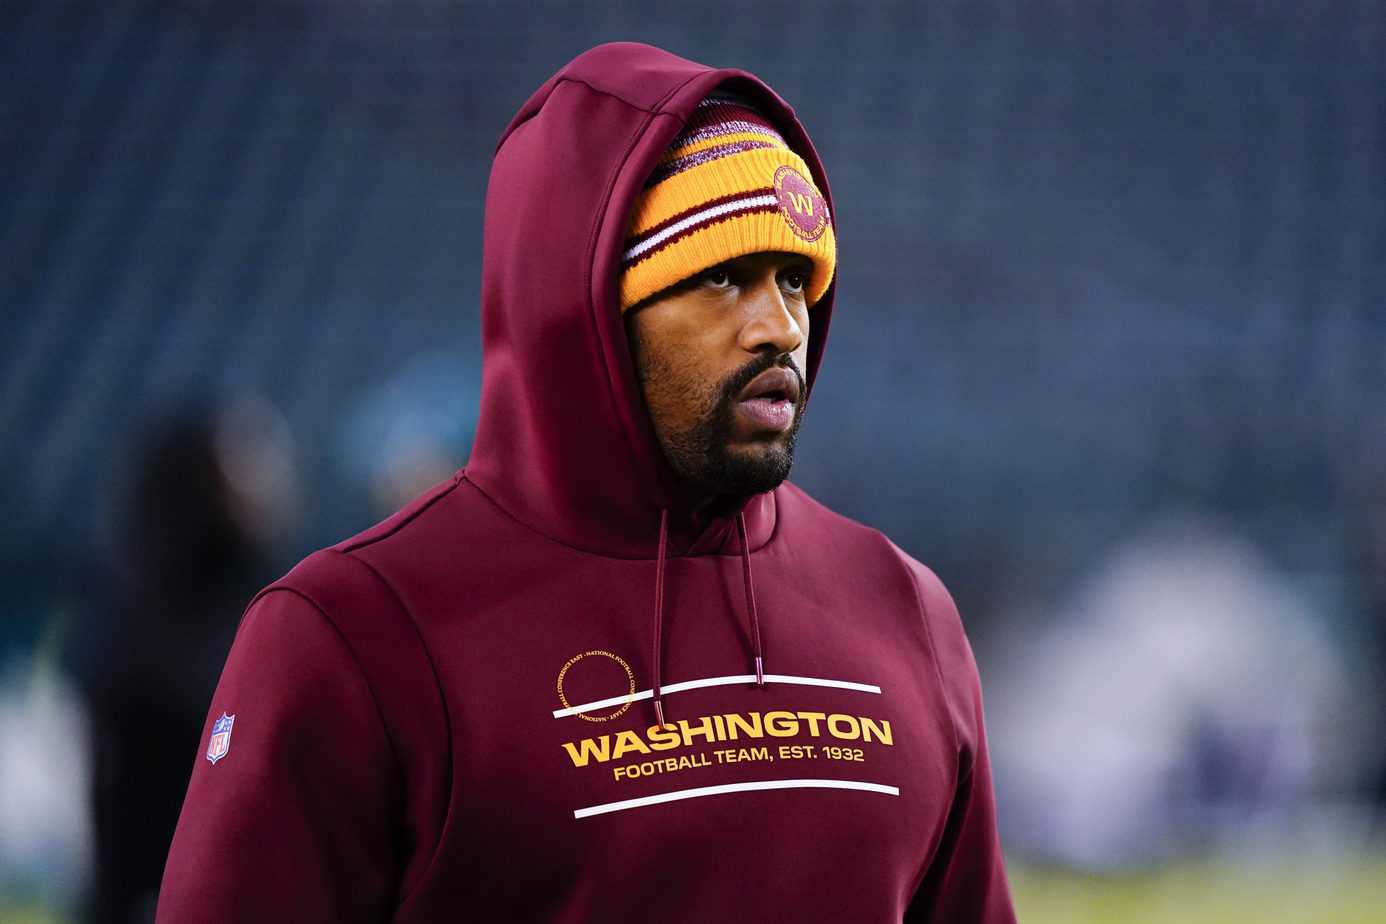 Washington Commanders defensive lineman Jonathan Allen apologized after posted a ridiculous Hitler opinion on social media Wednesday afternoon